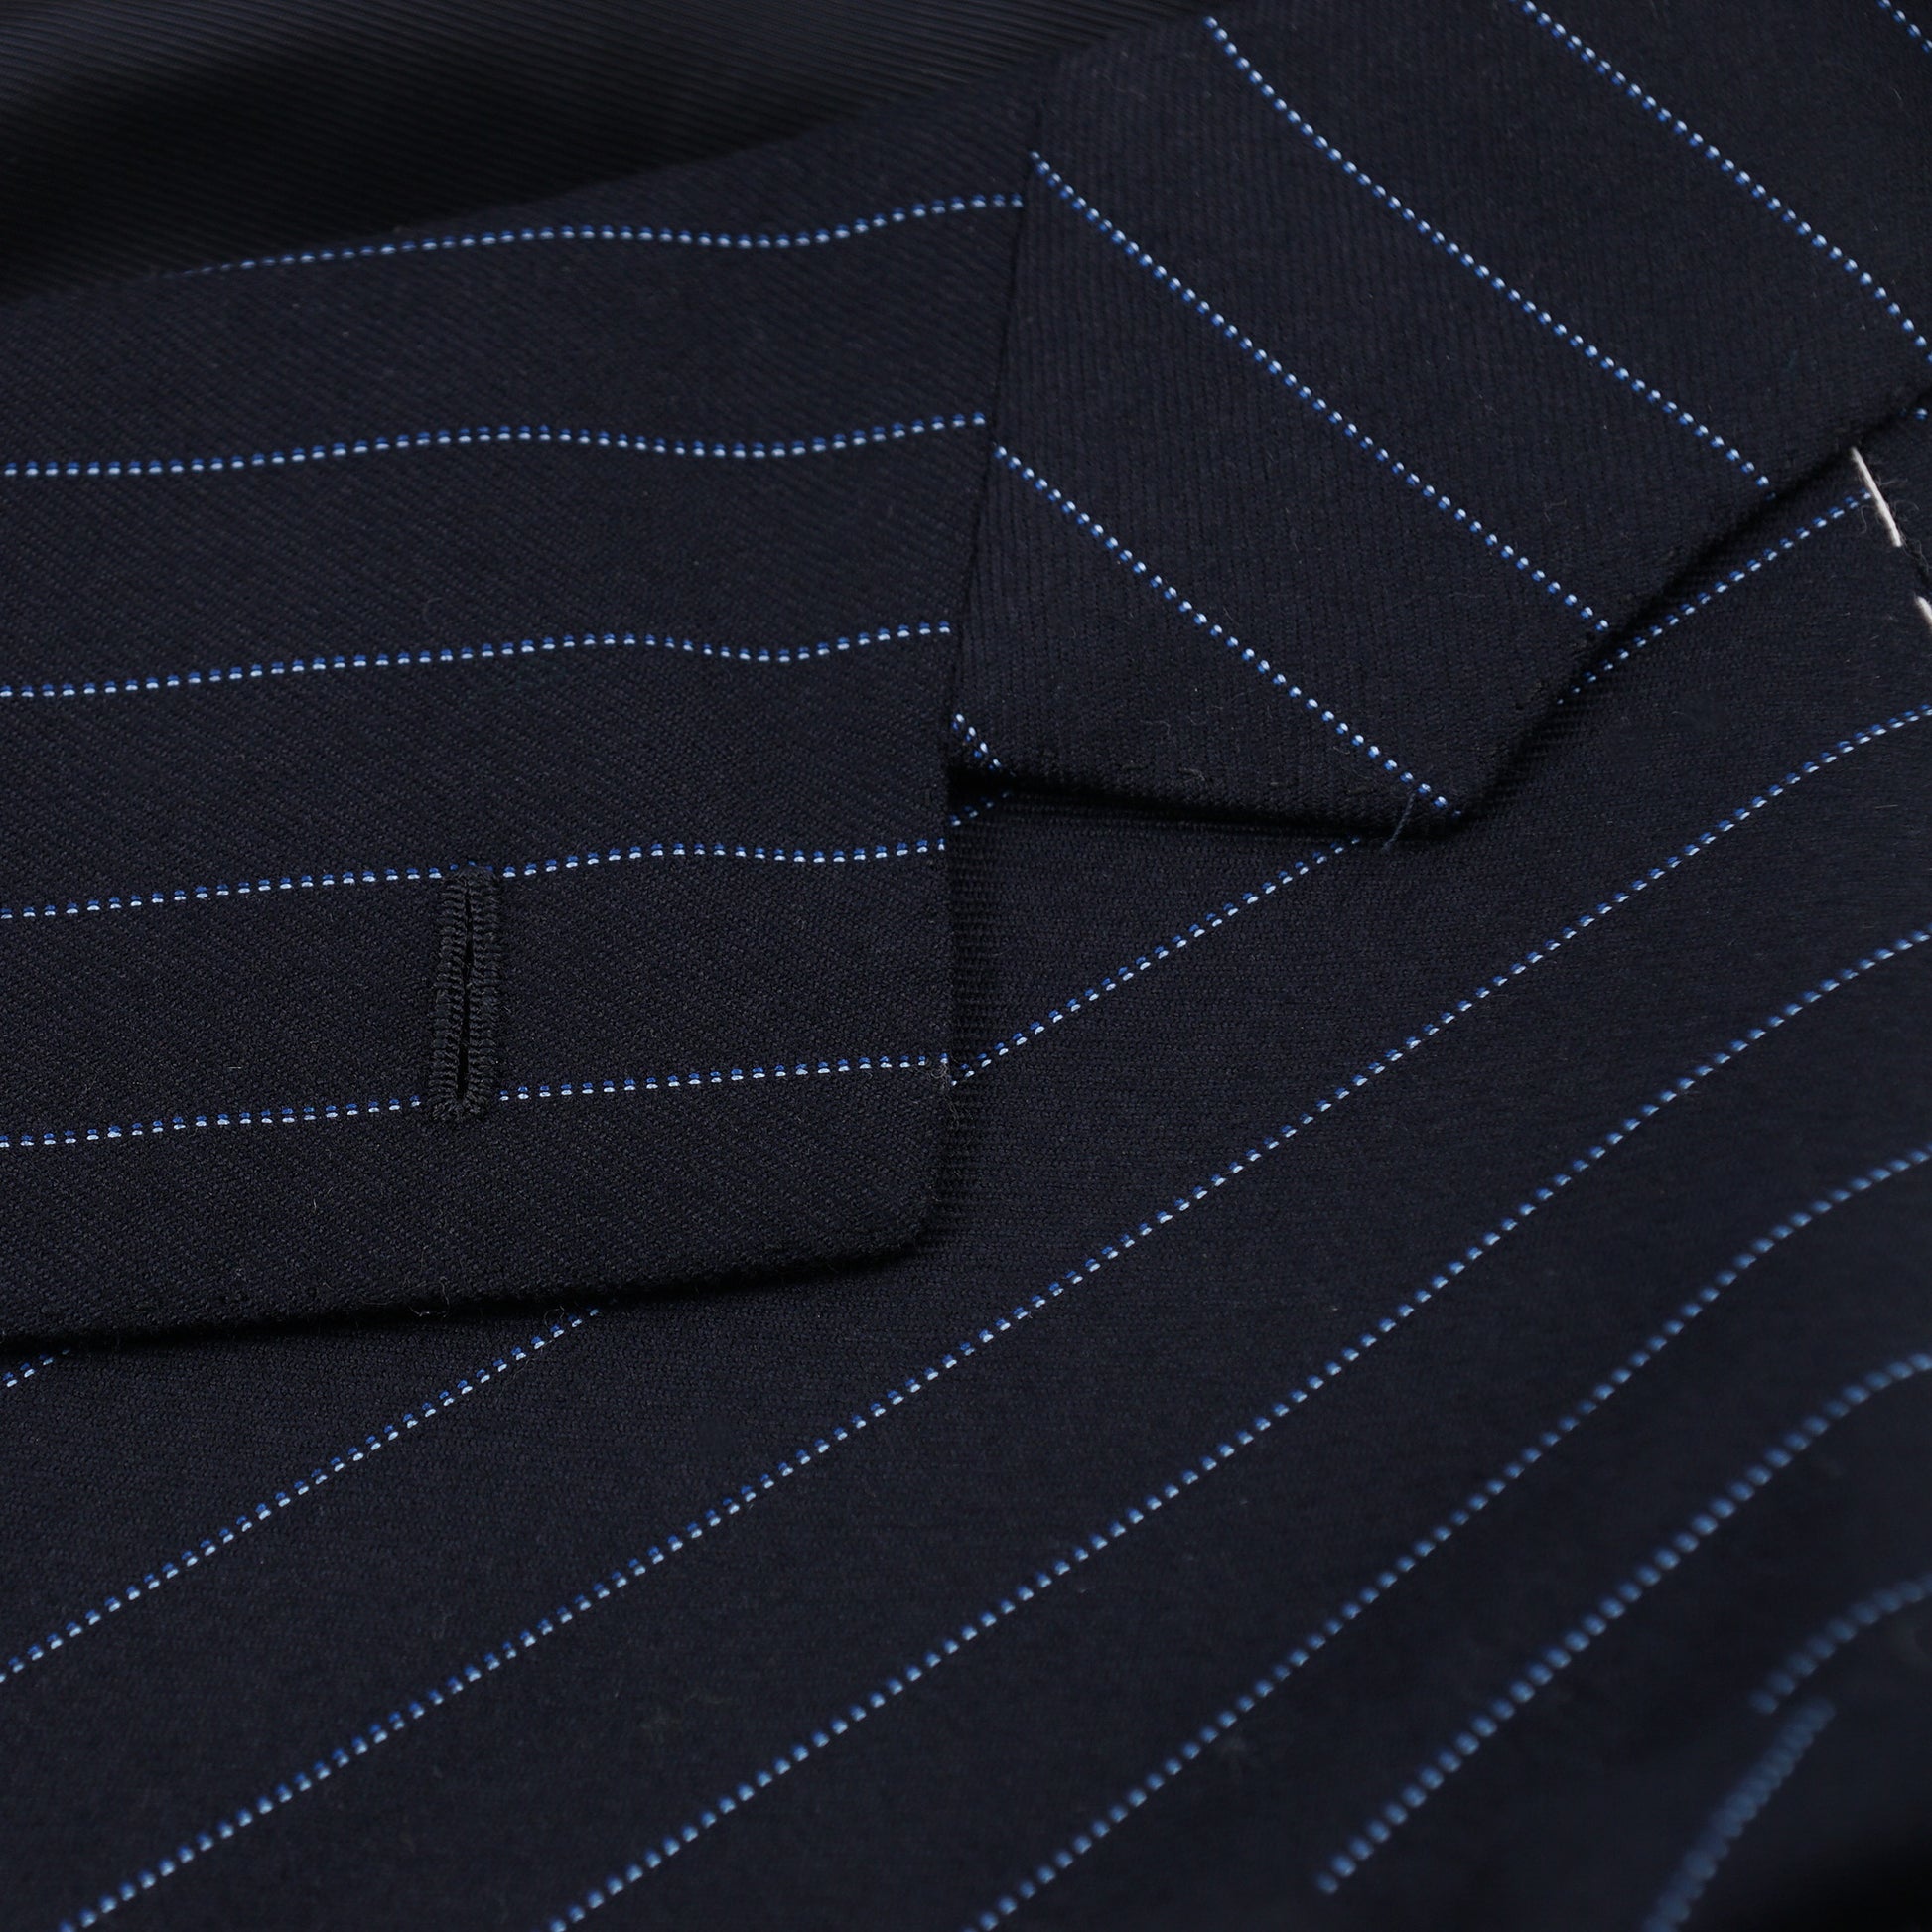 Suit Jacket Navy Blue Wool Cloth